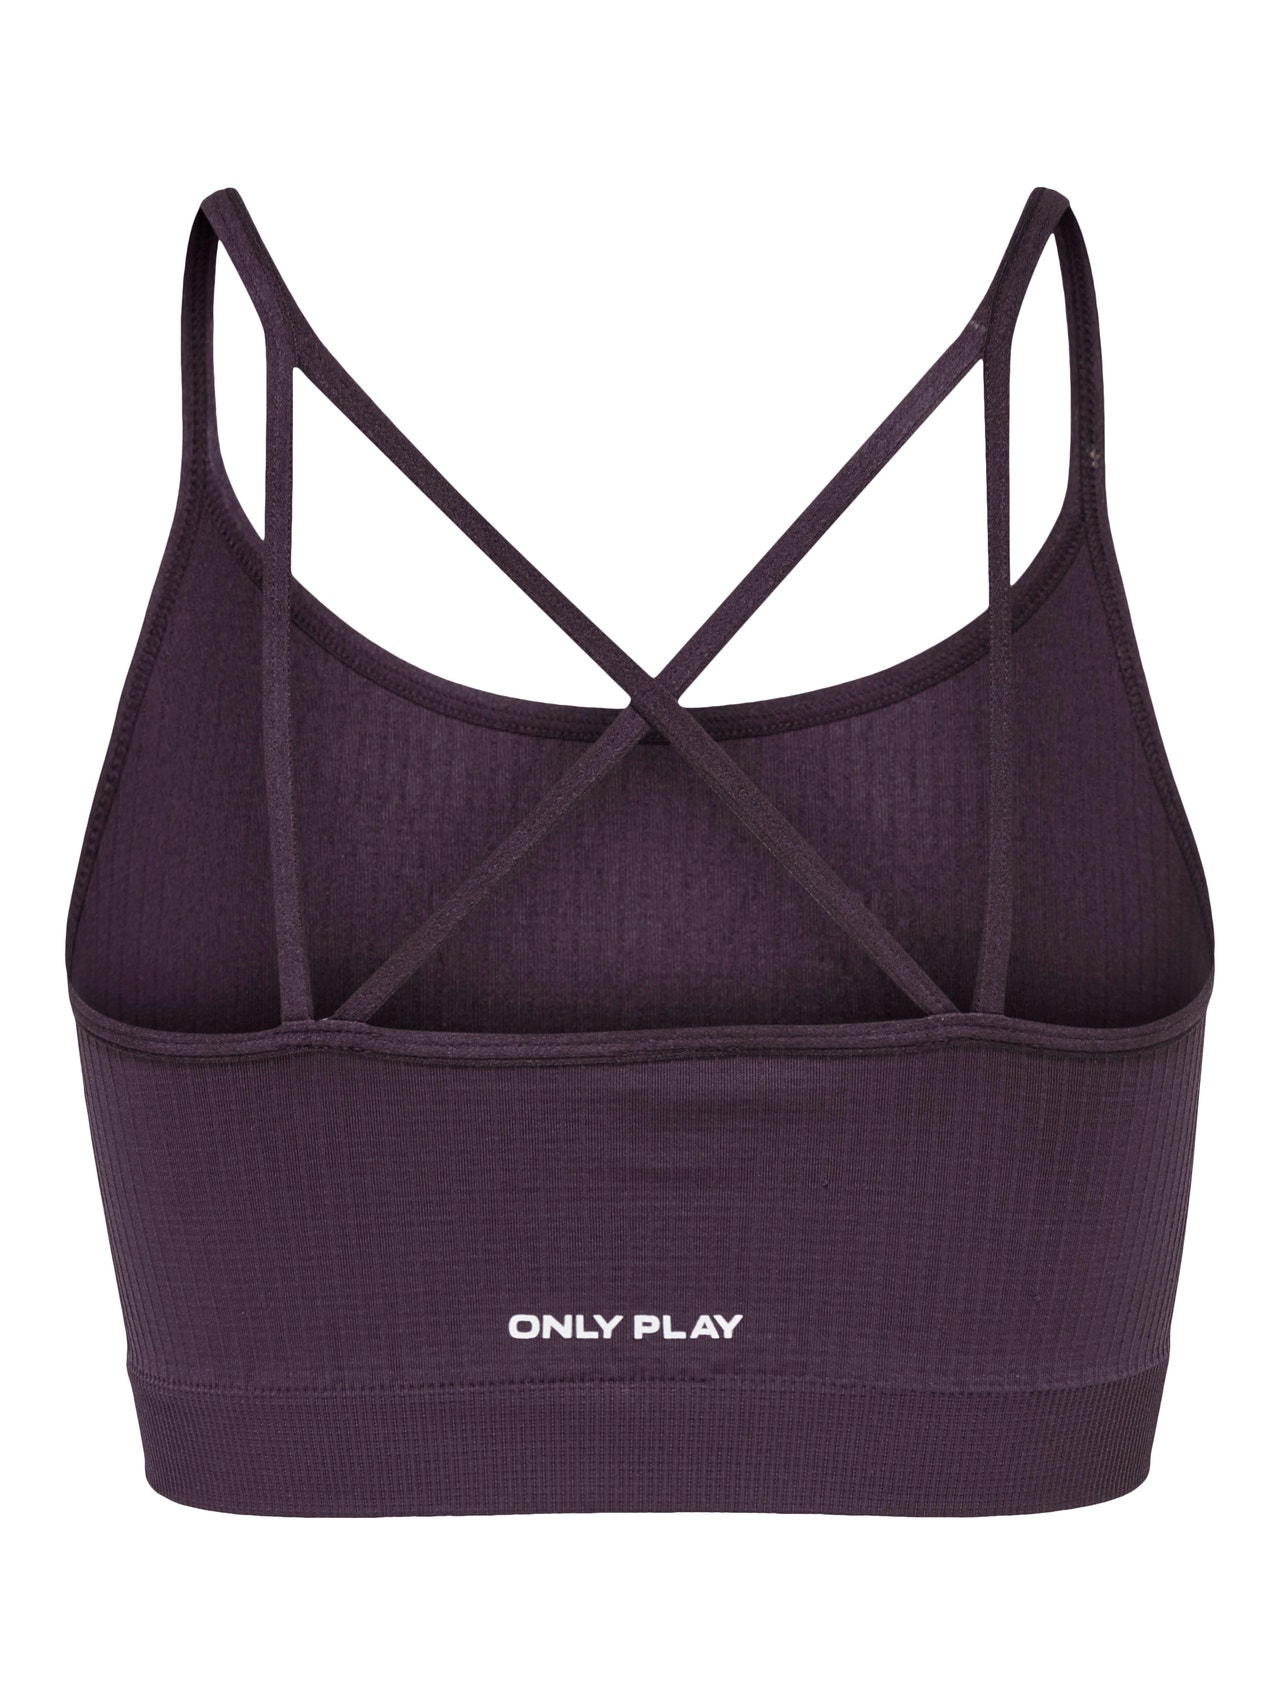 ONLY BH-er -Plum Perfect - 15274900